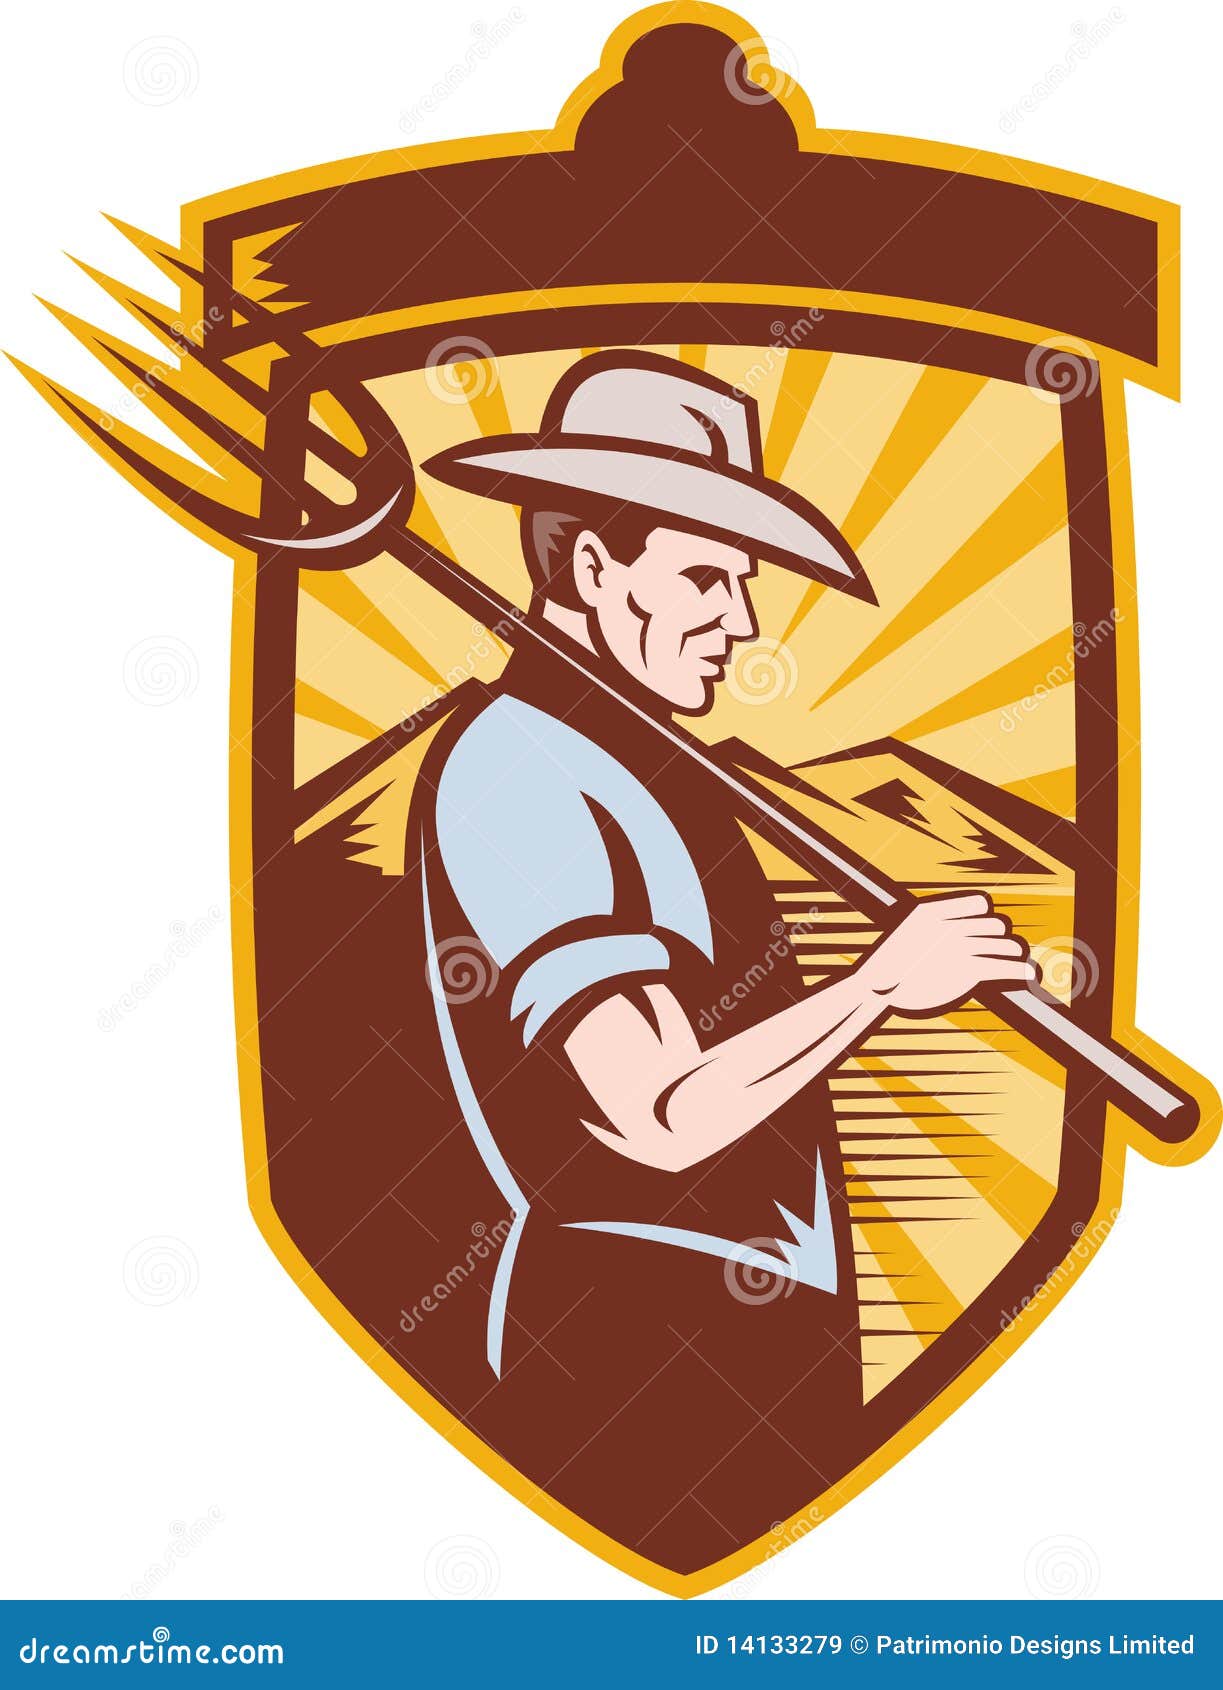 Farmer with pitch fork stock vector. Illustration of badge - 14133279